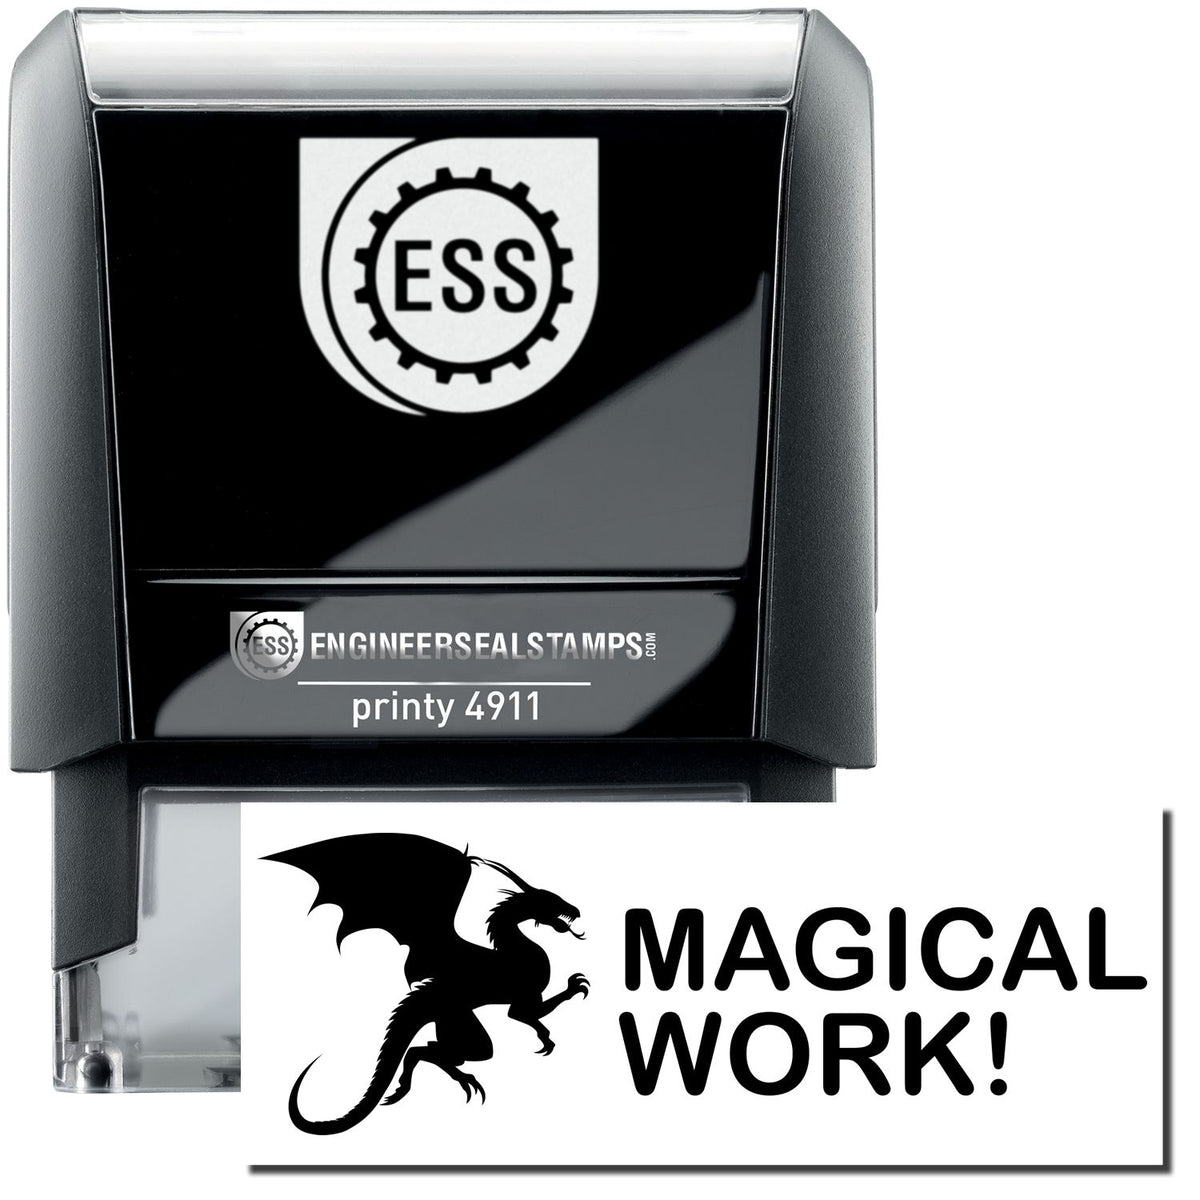 A self-inking stamp with a stamped image showing how the text &quot;MAGICAL WORK!&quot; (in a large font with an icon of a dragon on the left) is displayed after stamping.